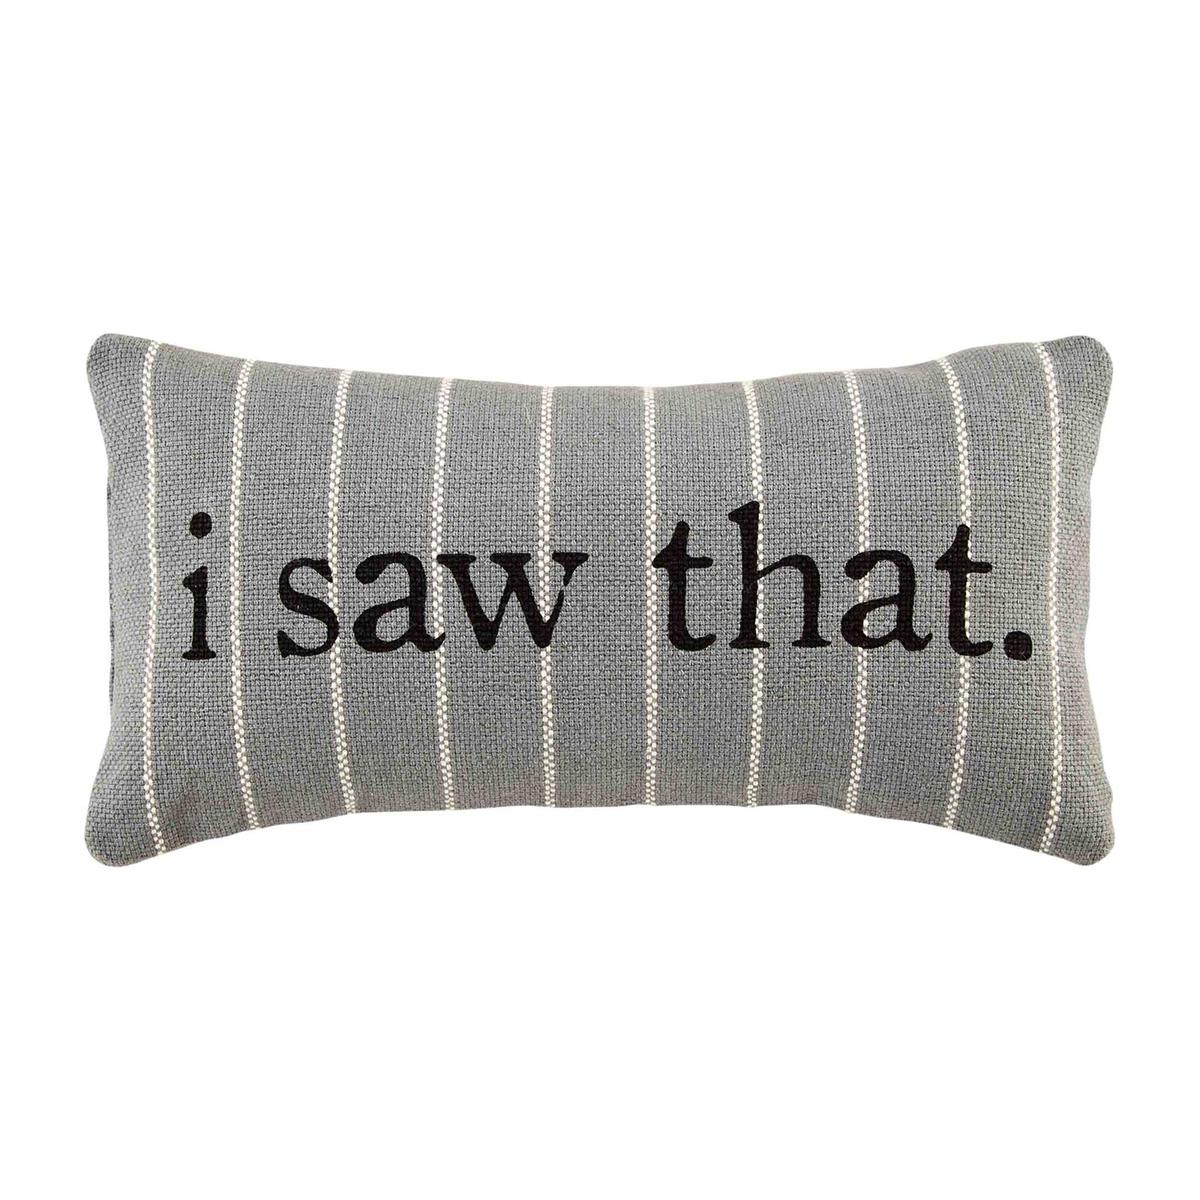 Small Funny Striped Pillows by Mud Pie